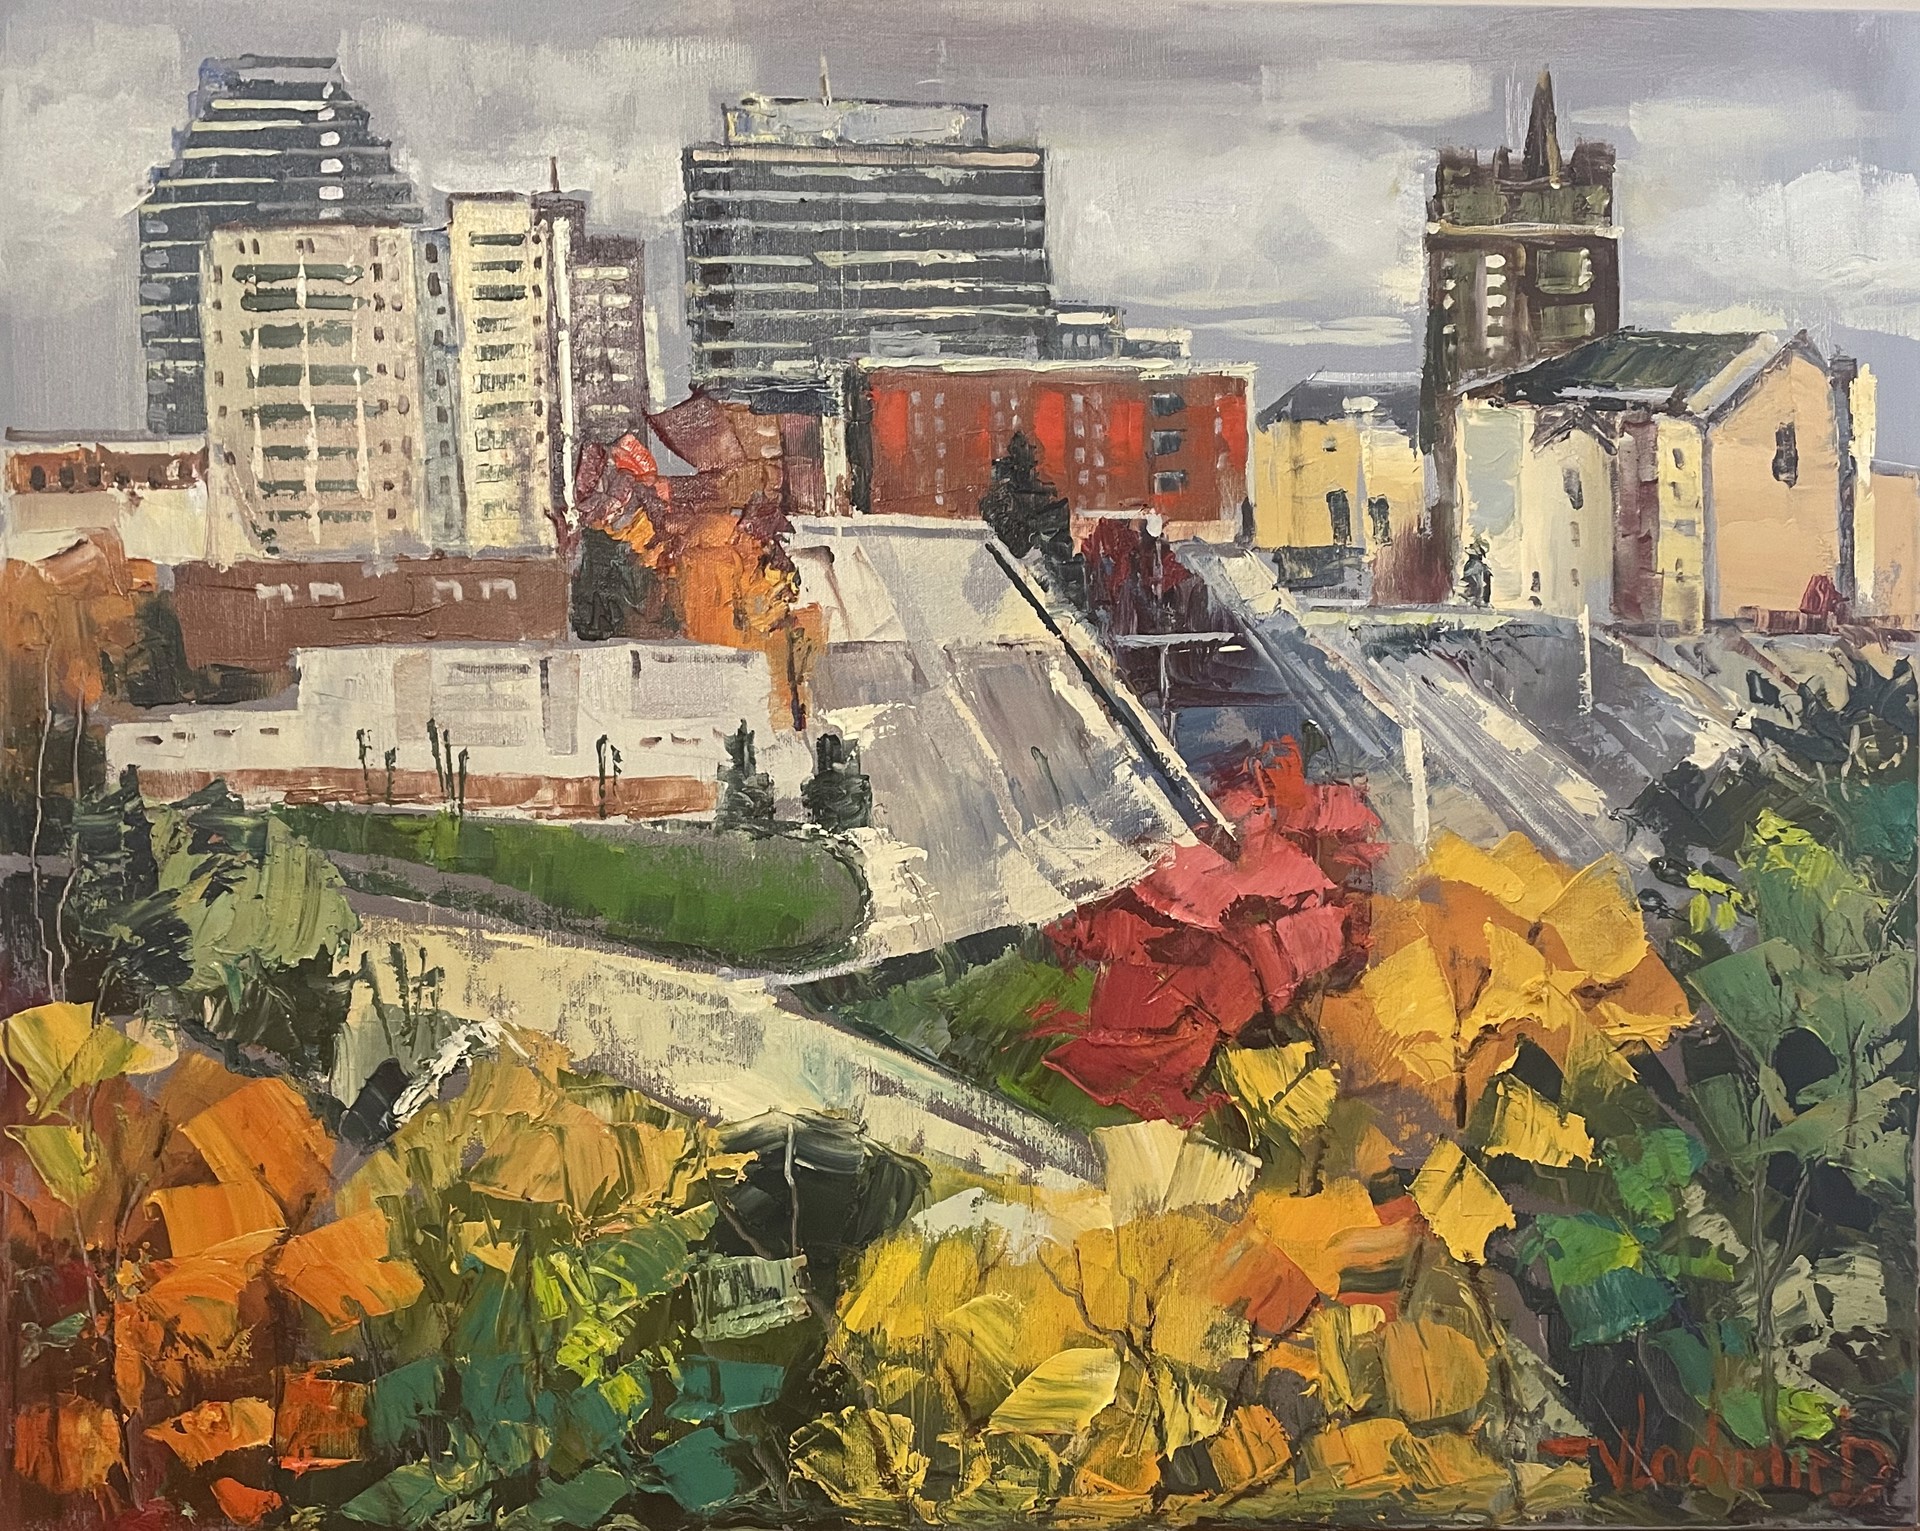 View on Downtown Knoxville by Vladimir Demidovich